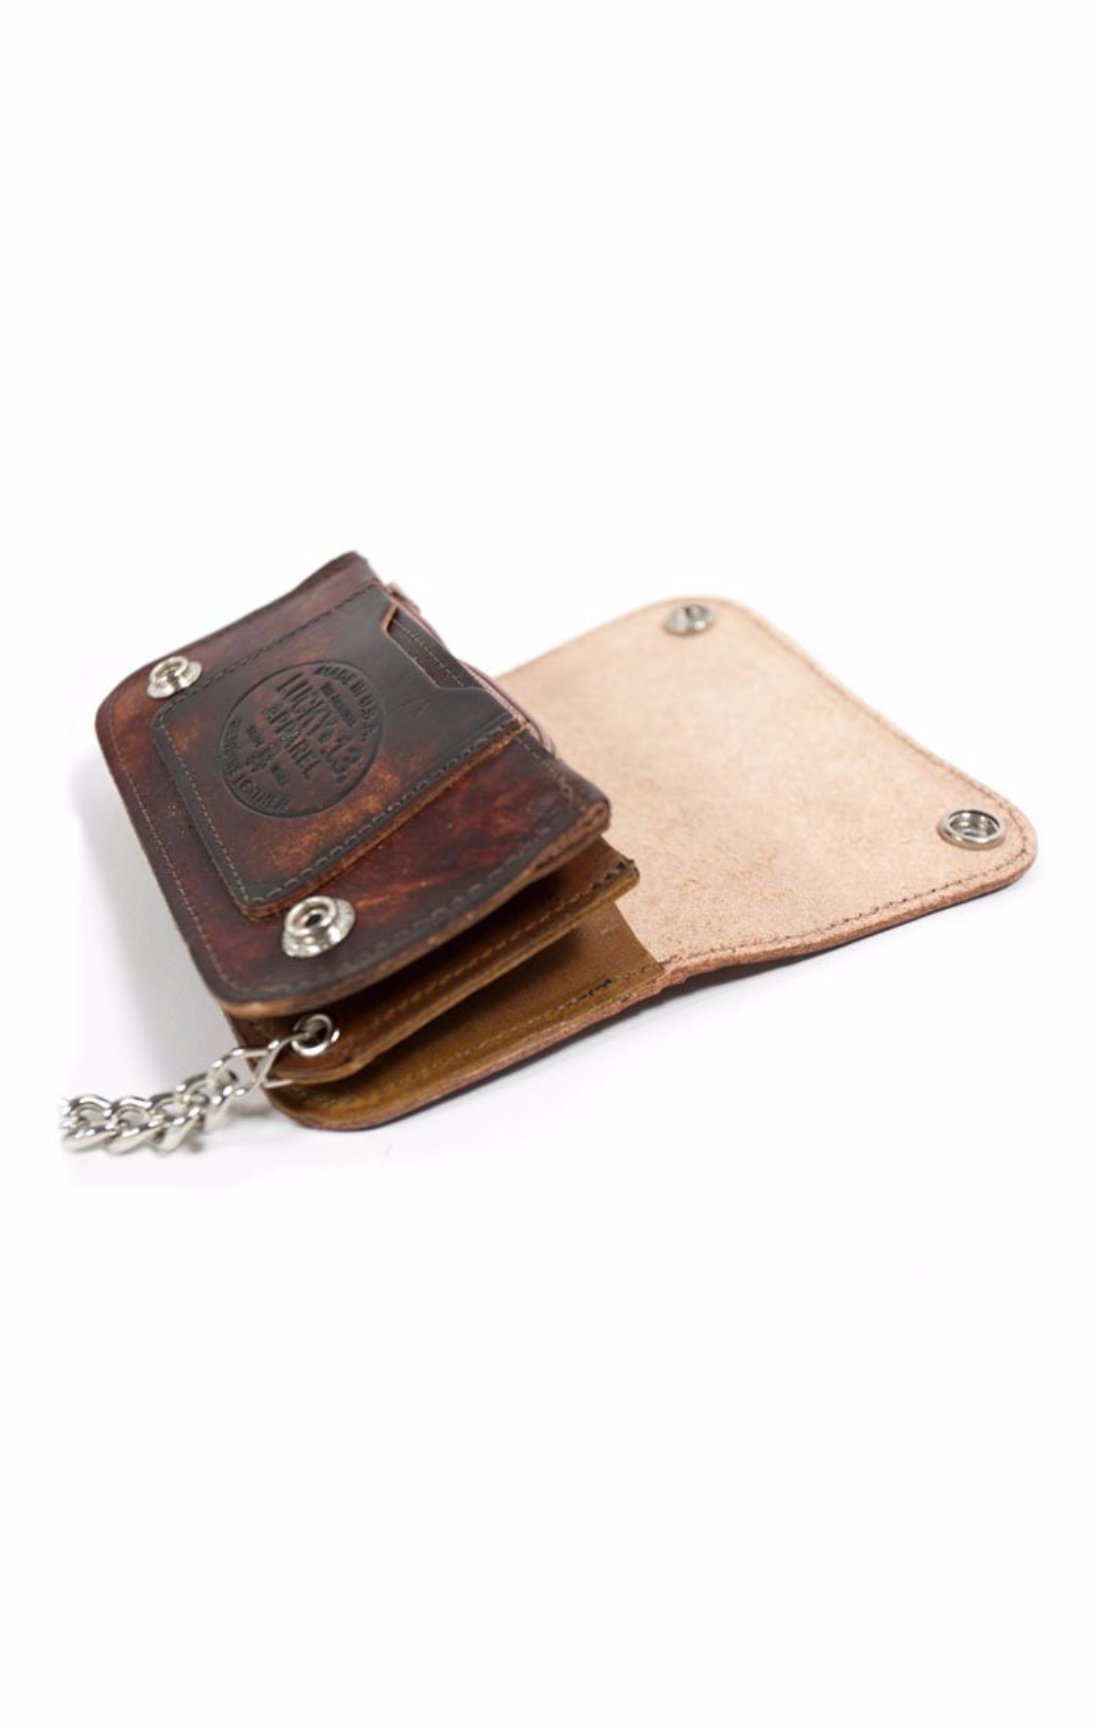 The IRON HORSE Wallet